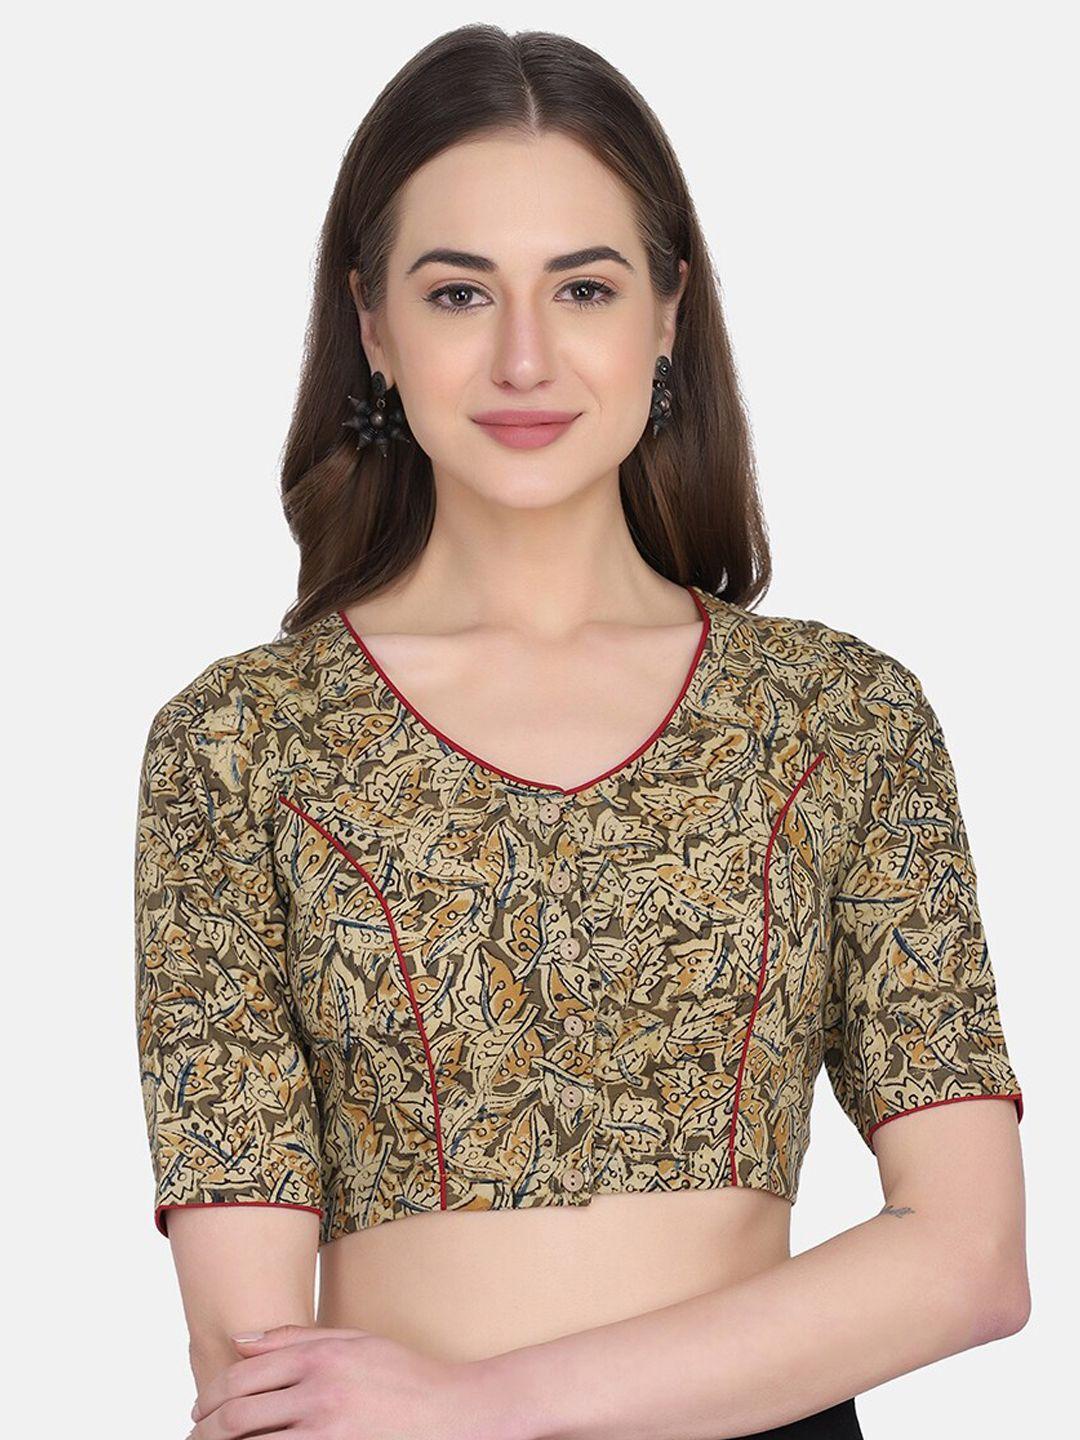 the-weave-traveller-women-camel-brown-hand-block-printed-cotton-saree-blouse